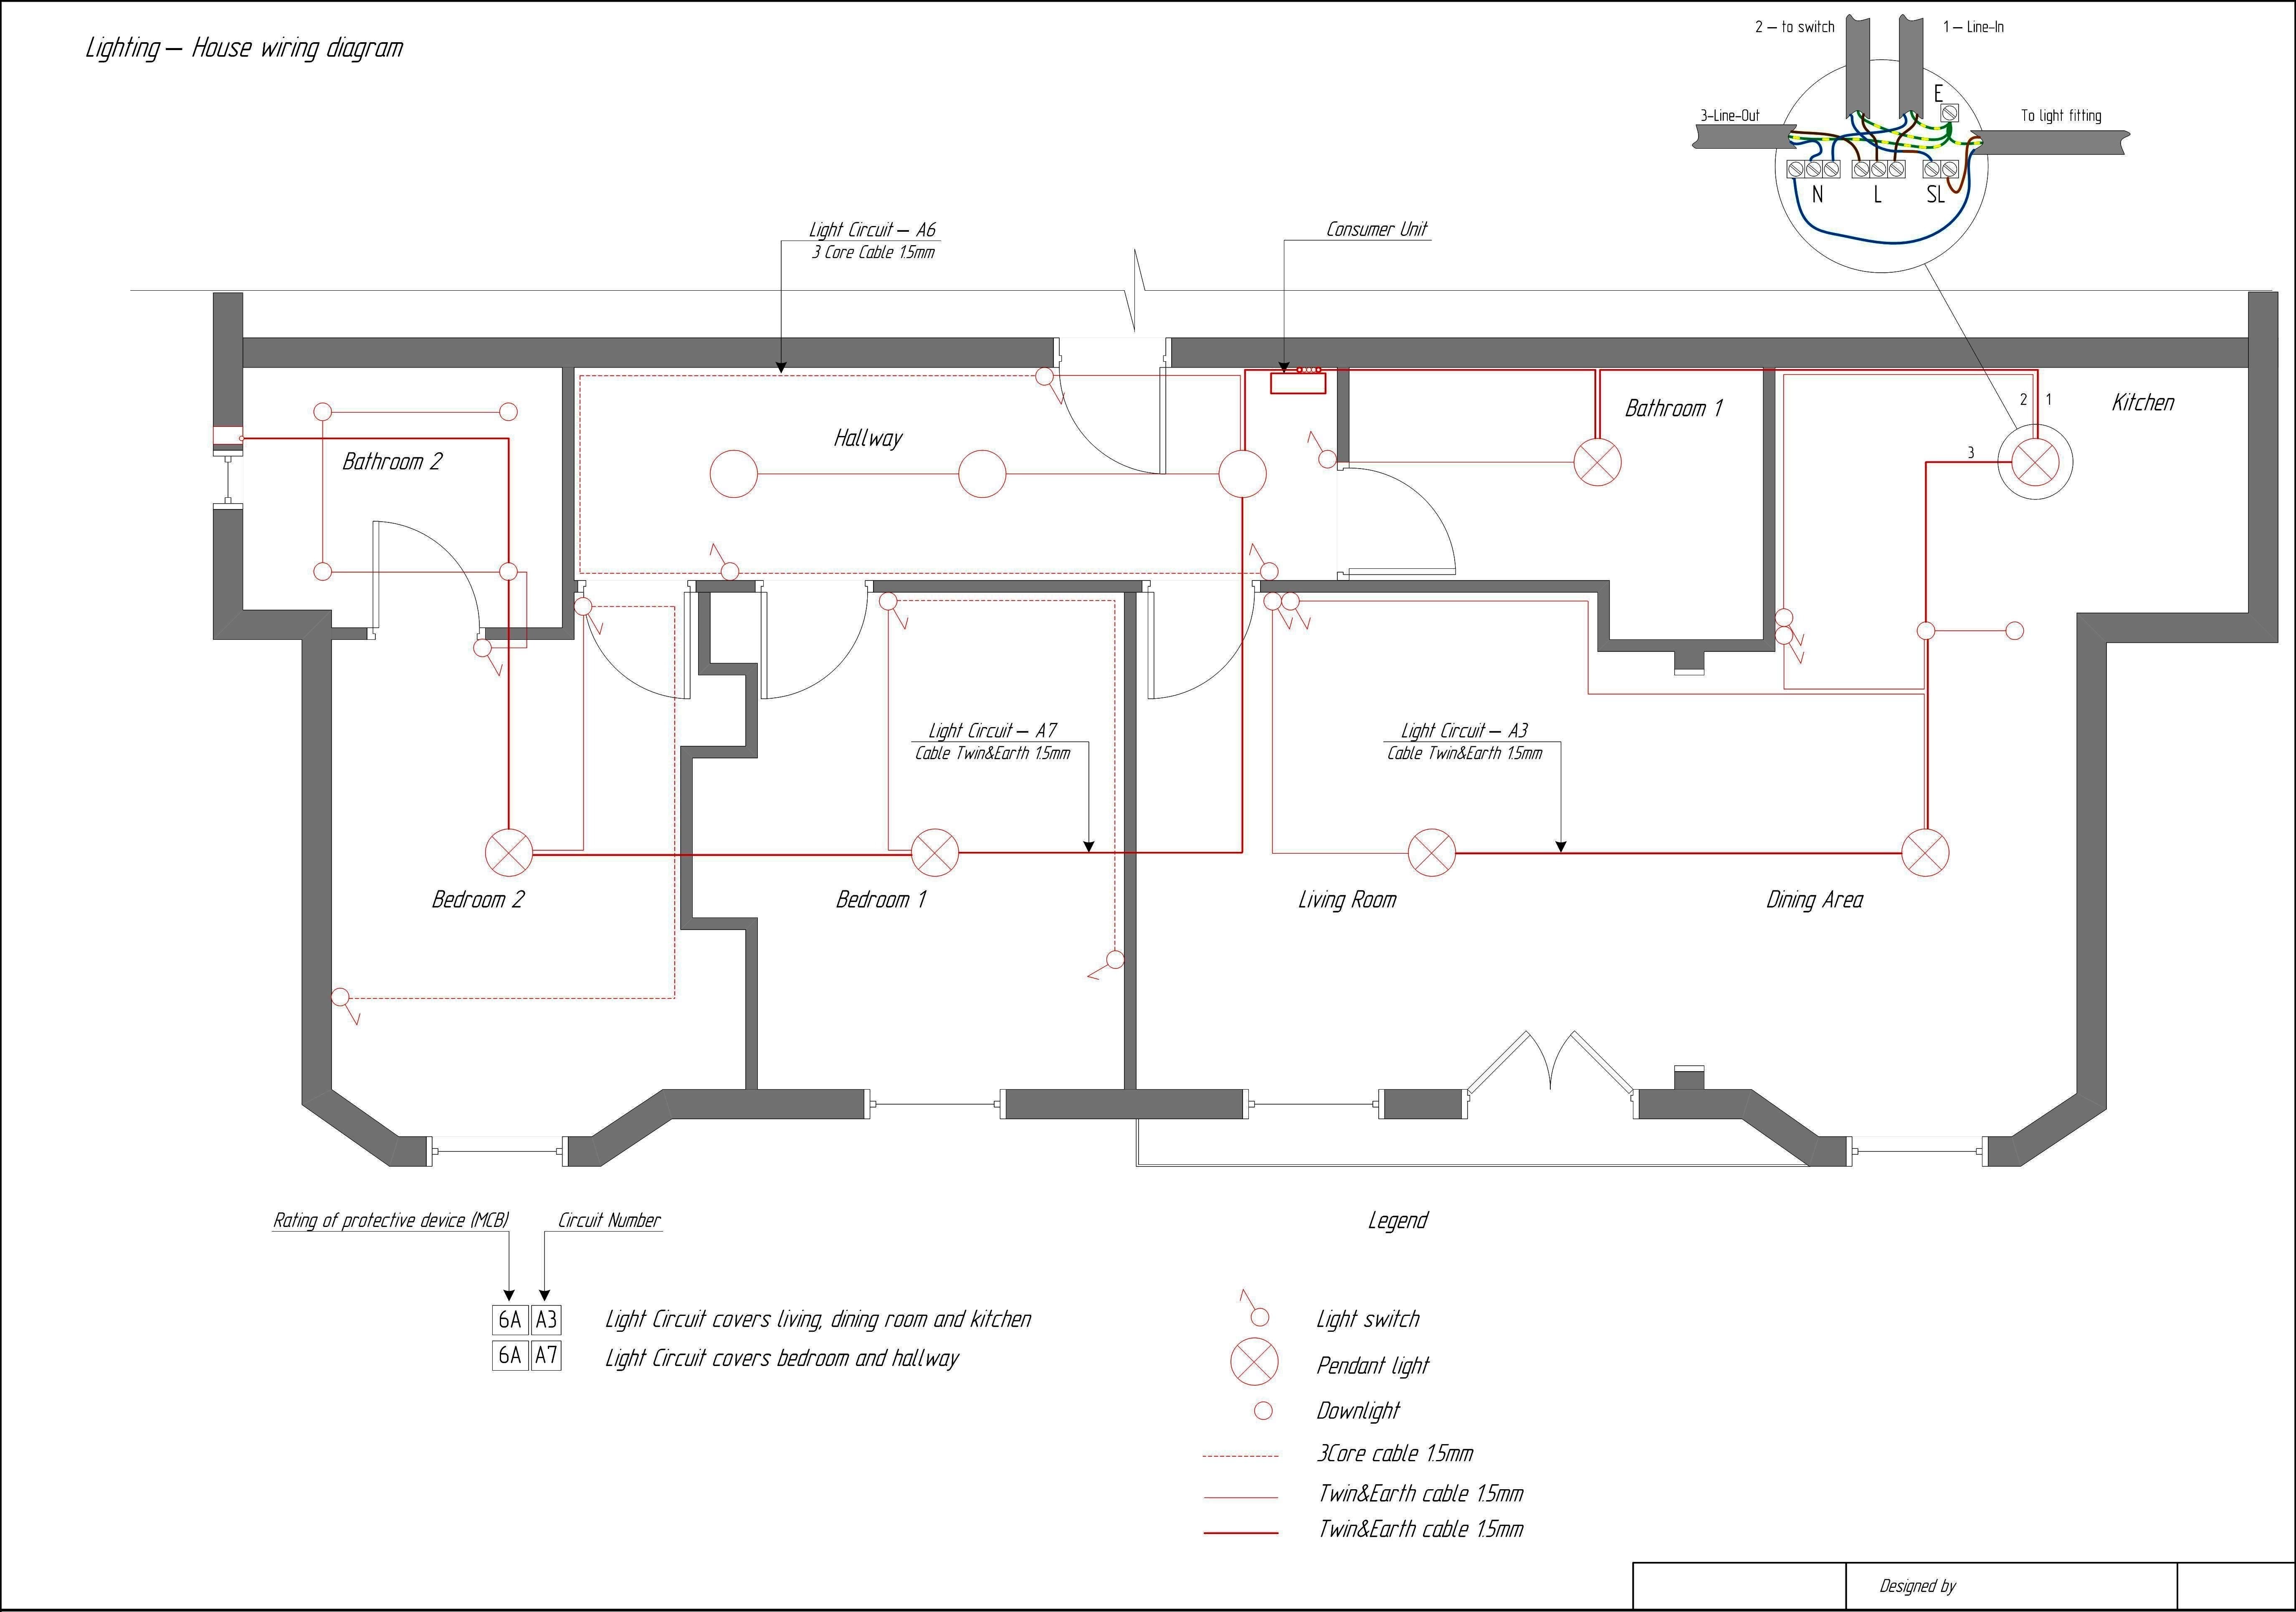 Wiring Diagram Apps Best Electrical Diagram App Best House Electrical Plan software House